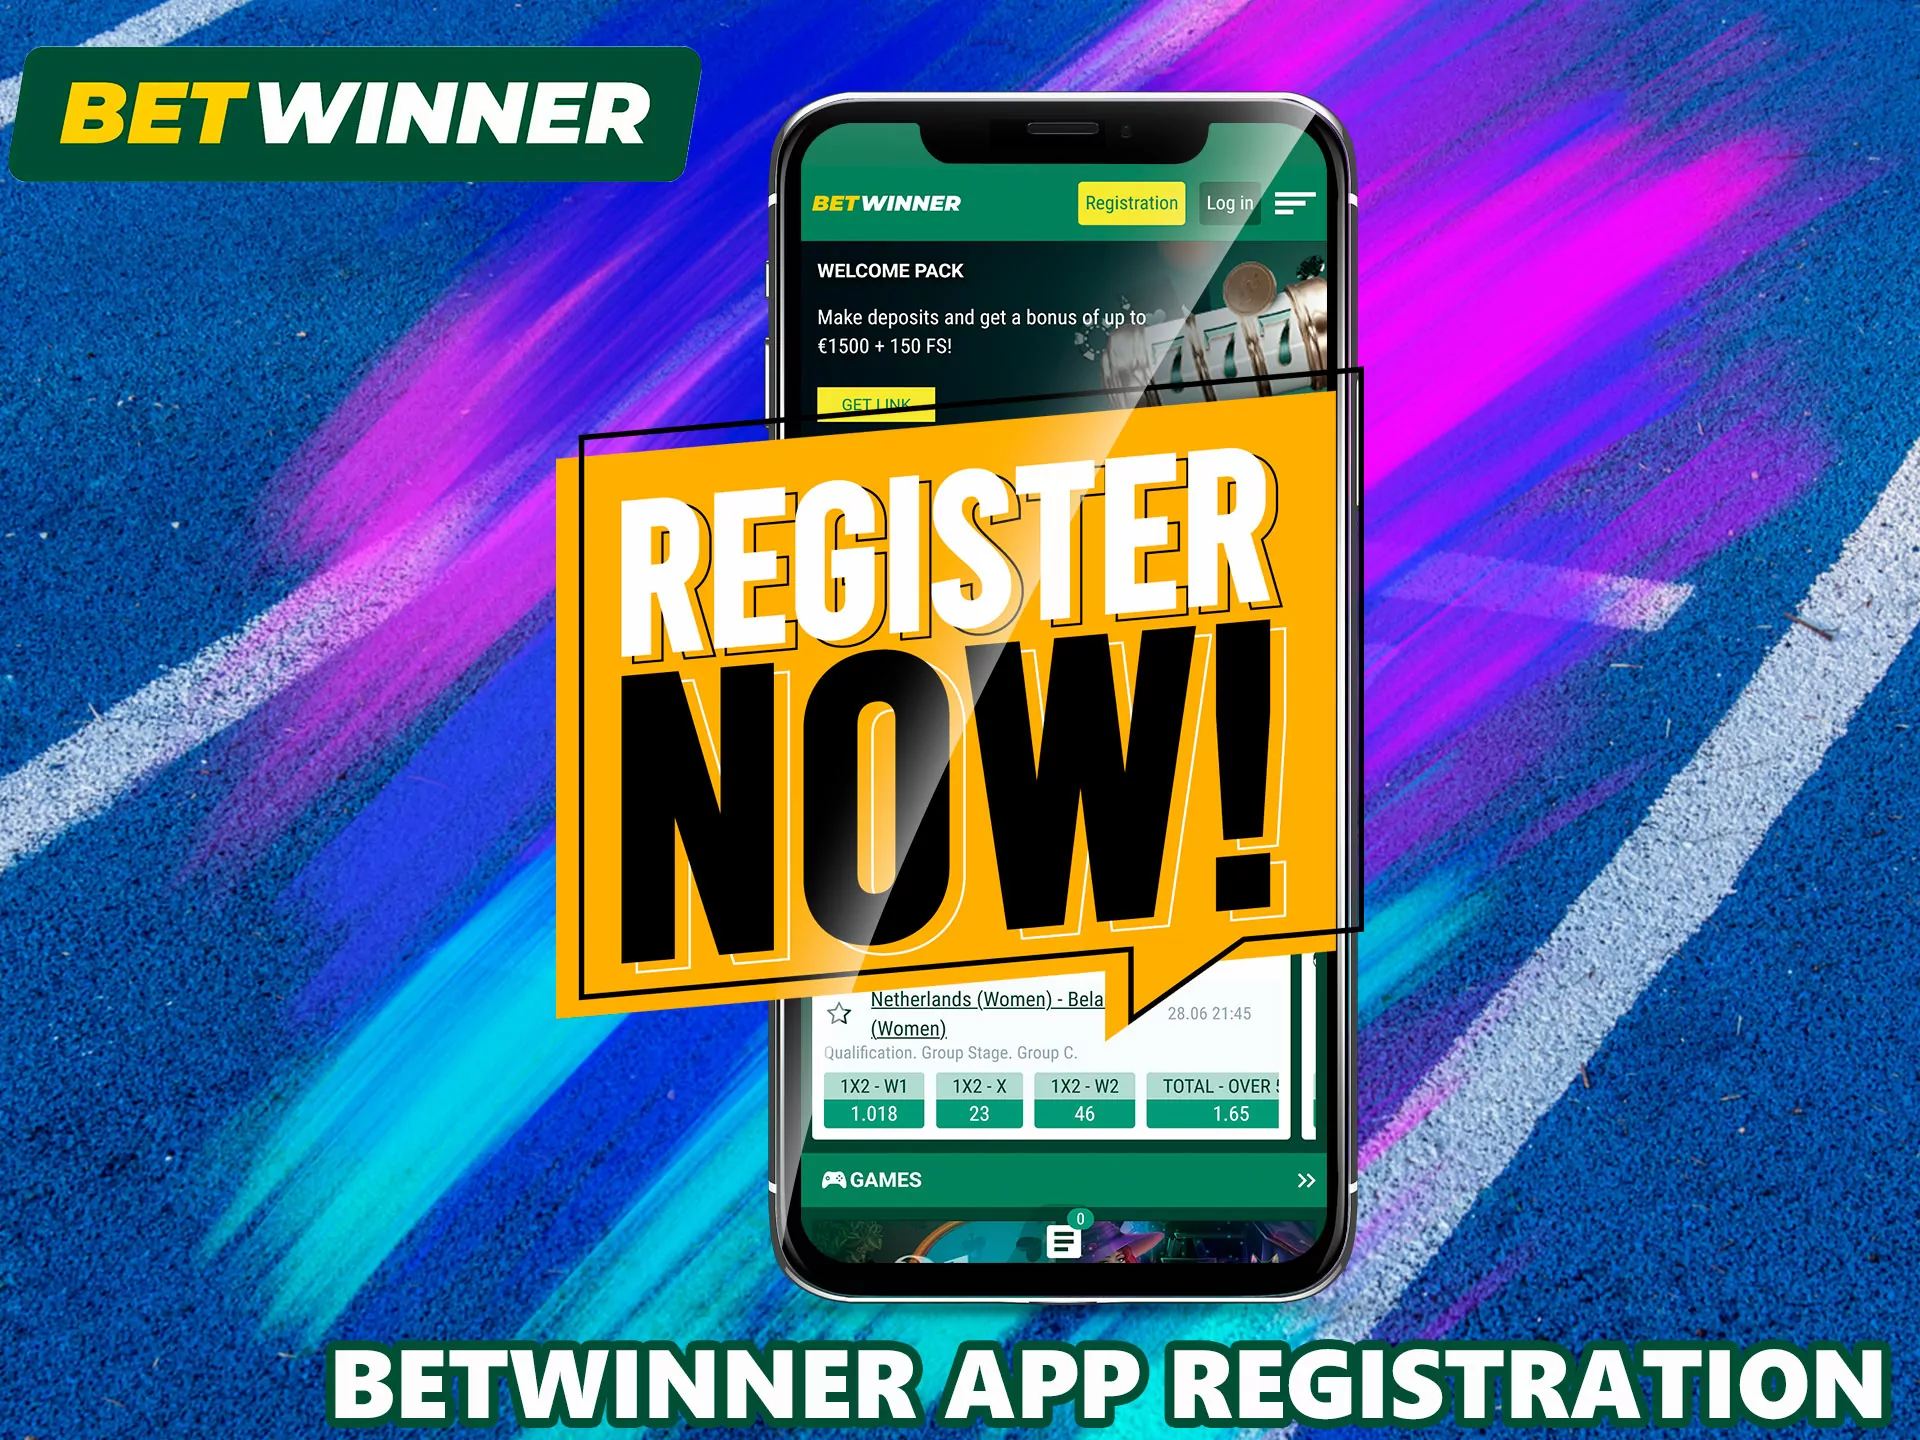 Even away from home, you can easily place your favorite bets directly from your smartphone thanks to the user-friendly application.